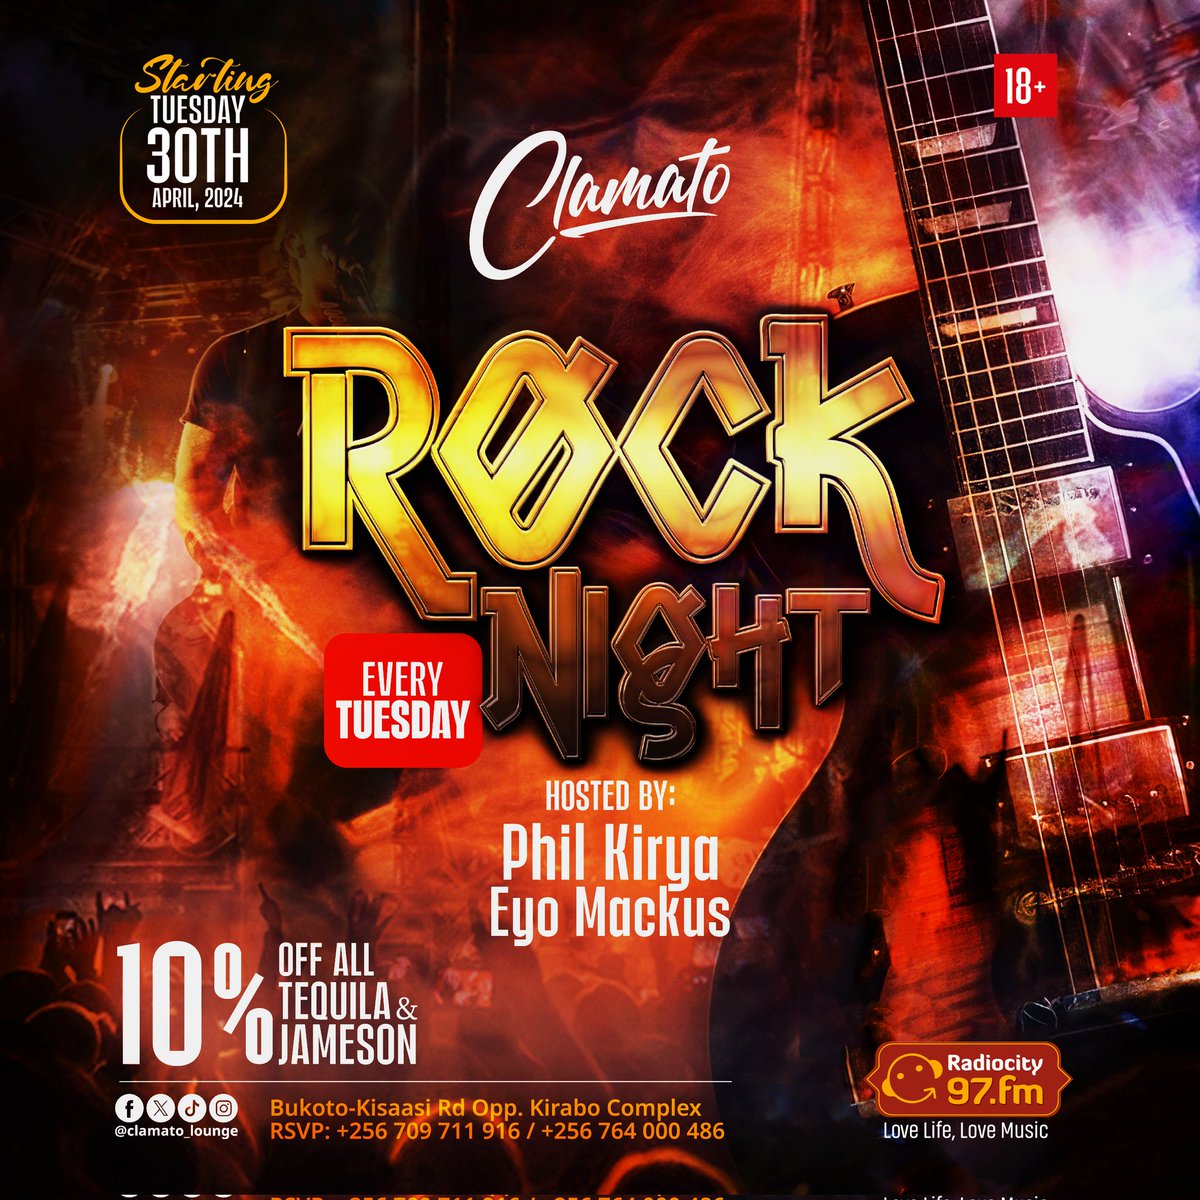 Tomorrow is a Public Holiday.

A chance for us to do what we normally do before a public holiday... Nyuk early and turn up.

@clamato_lounge is the place to be as @EyoMackus & I introduce a new Rock Night.

Be a part of the 1st edition of something new.